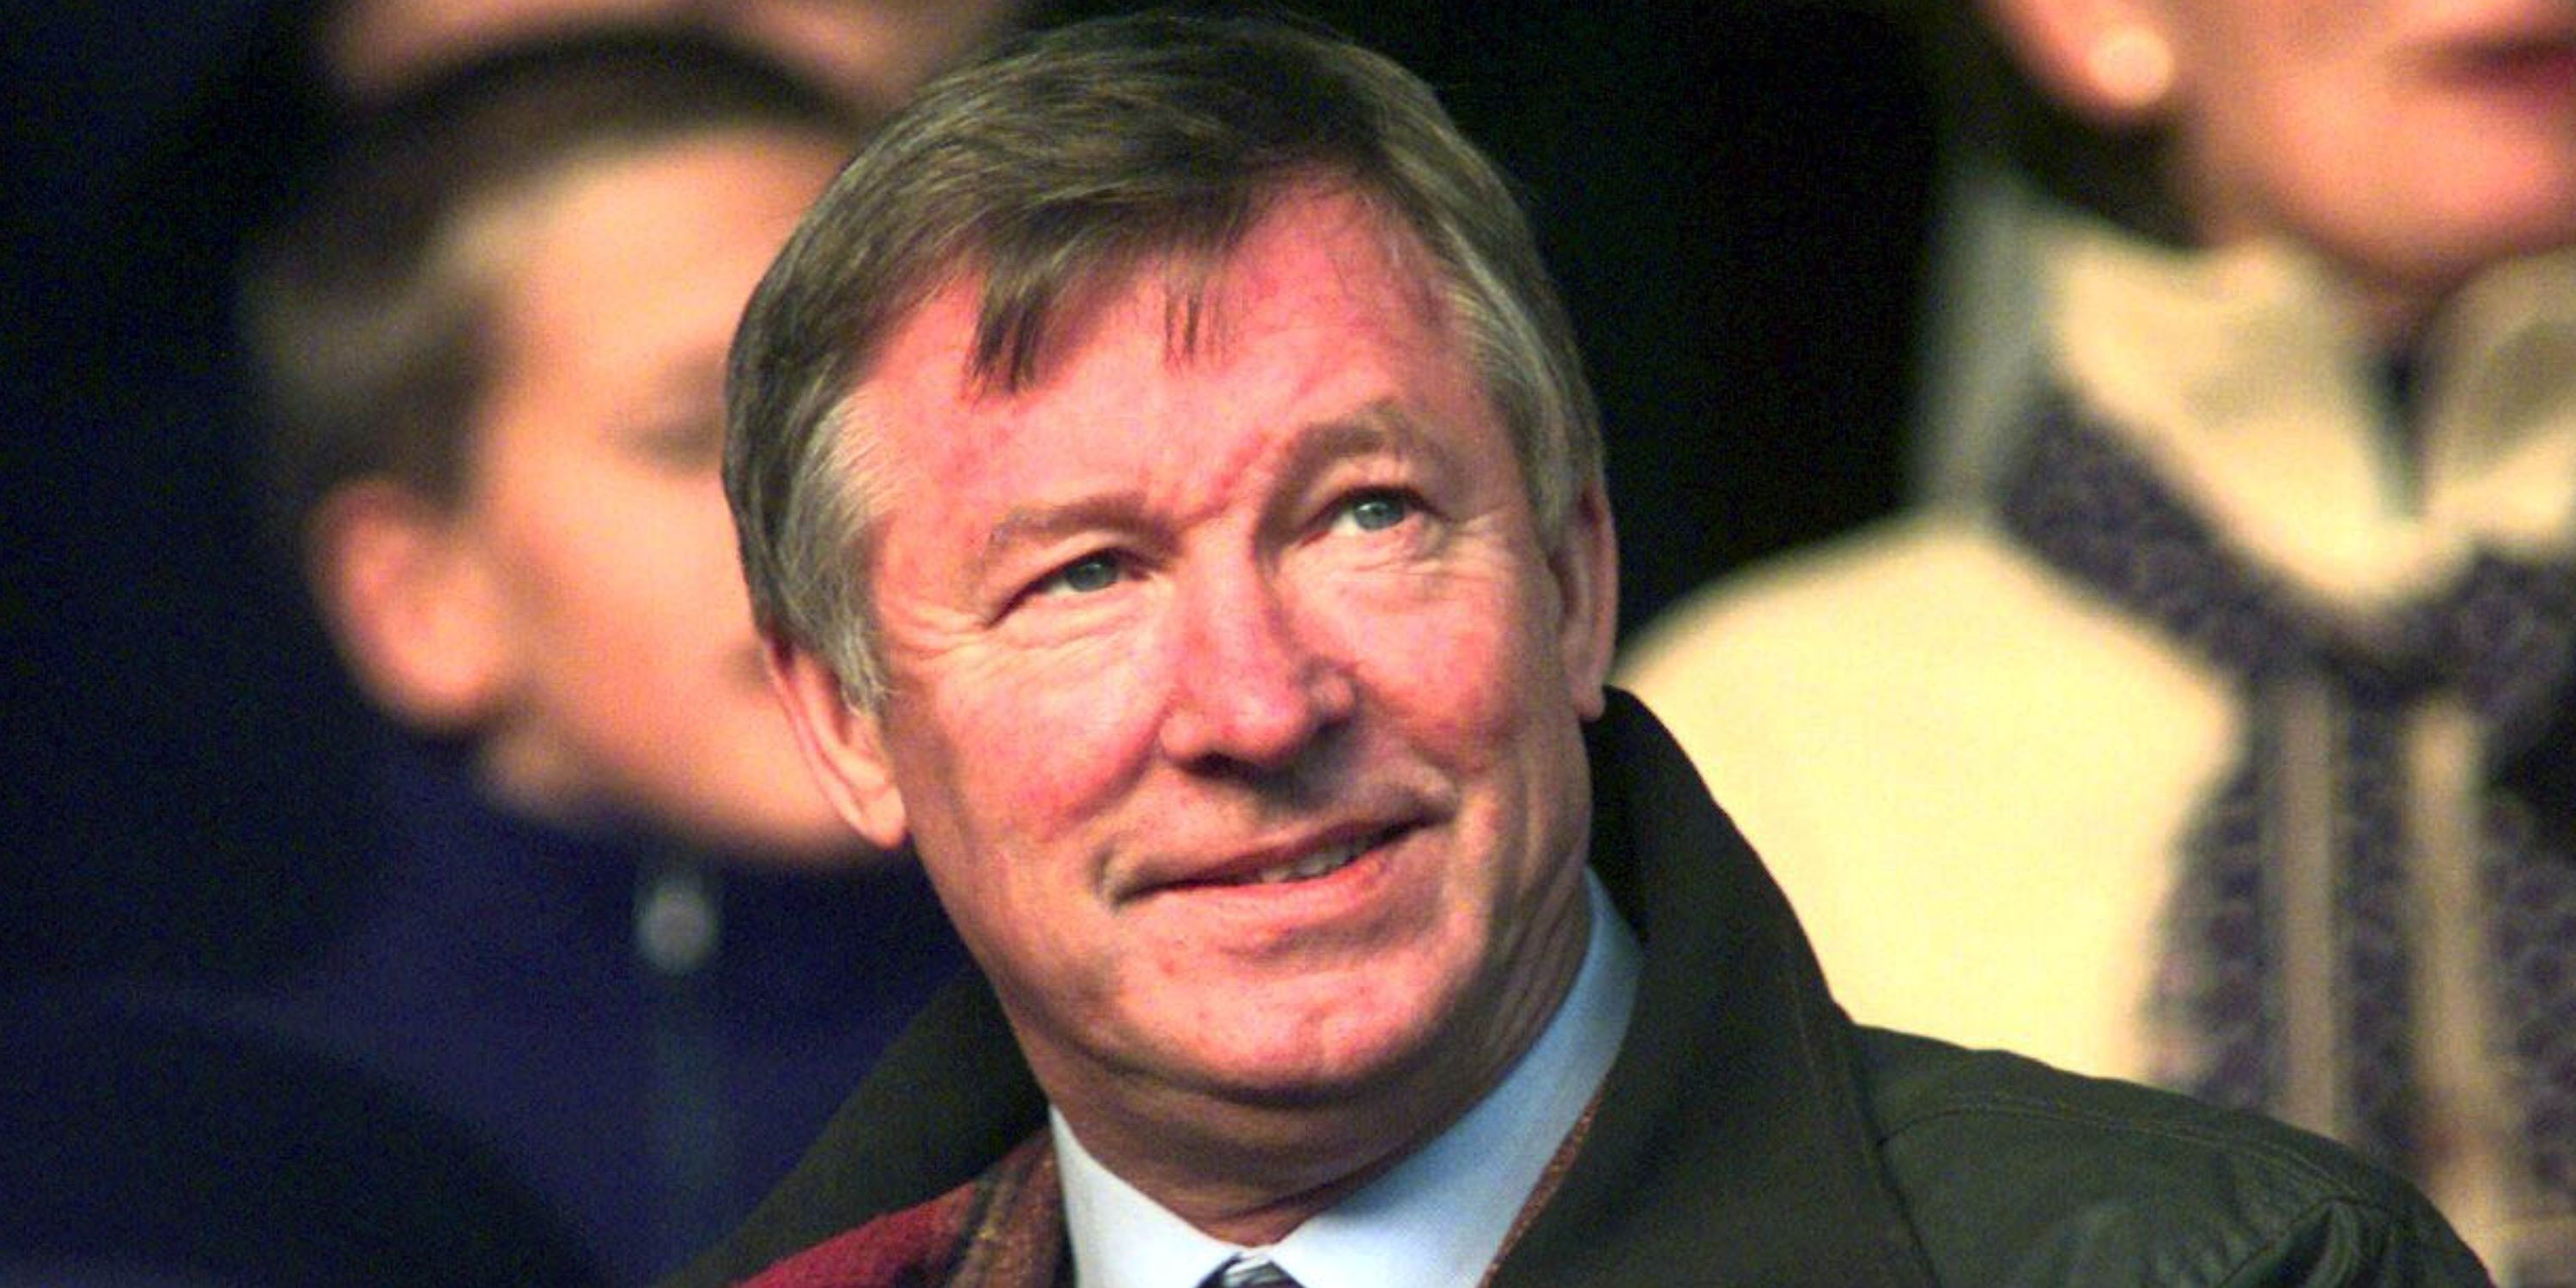 Manchester United's manager Sir Alex Ferguson at a game looking on